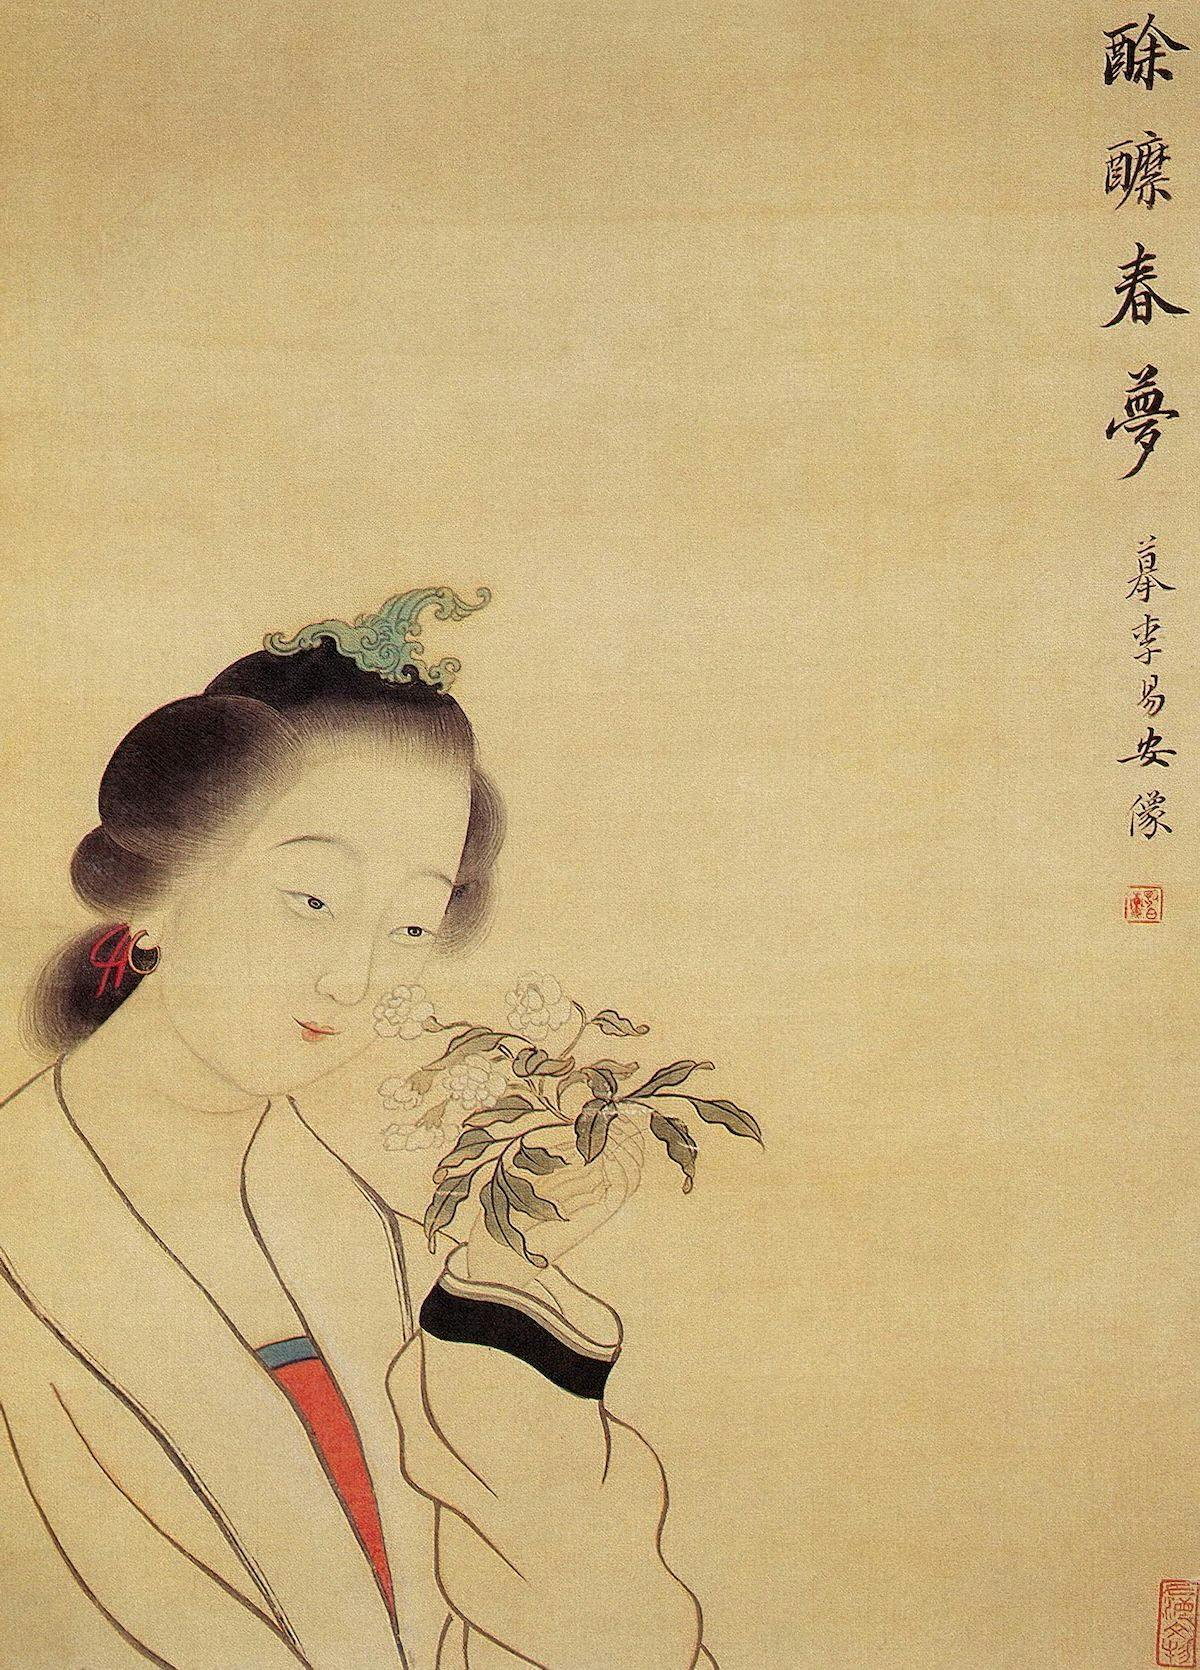 Li Qingzhao, Chinese writer and poet in the 12th Century